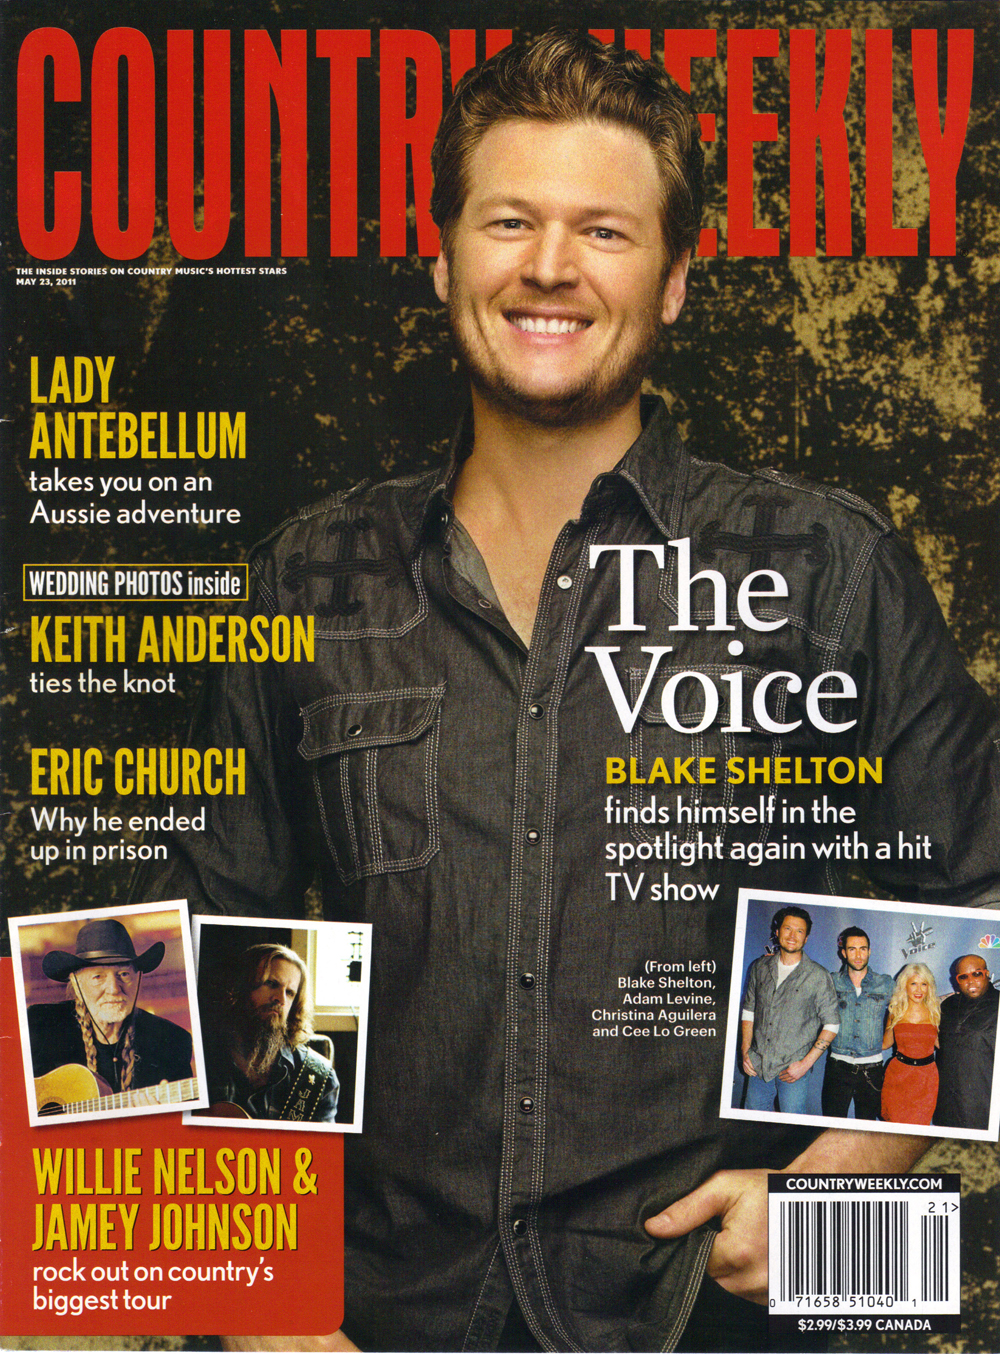 Country Weekly - May 23rd 2011